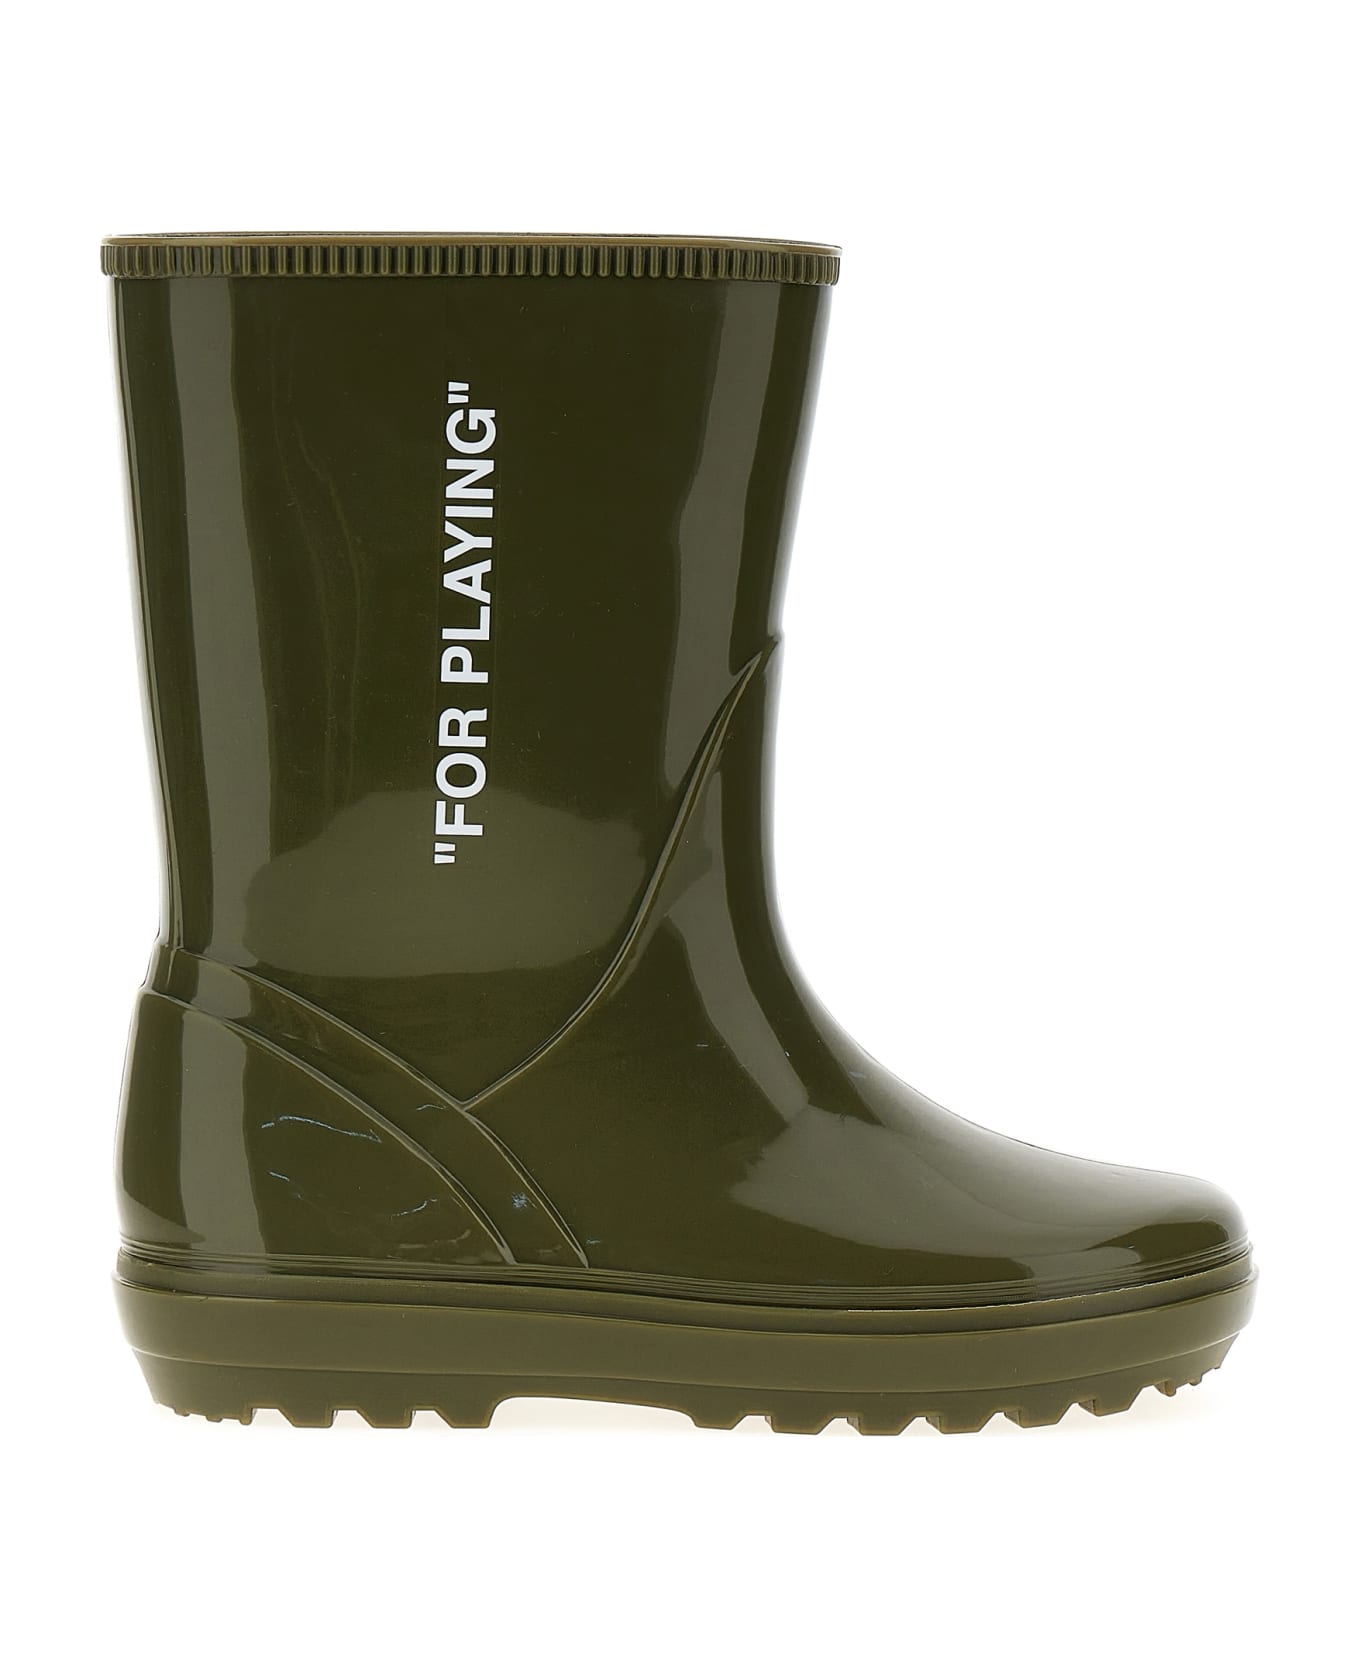 Off-White 'for Playing' Boots - Green シューズ